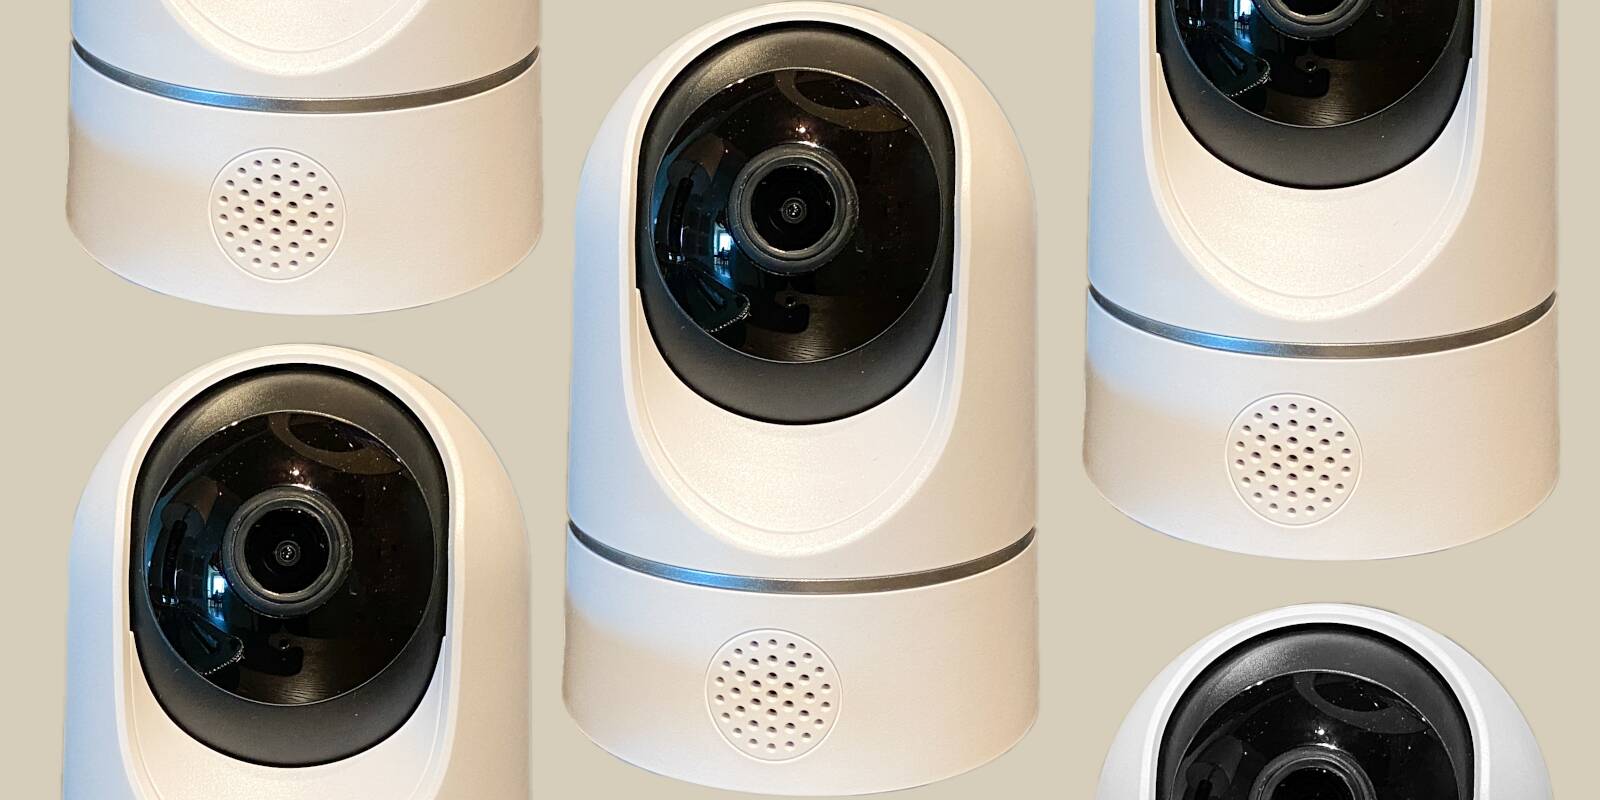 Major Privacy Breach as Eufy Security Camera Owners Report Seeing Other  Users' Video Feeds - MacRumors